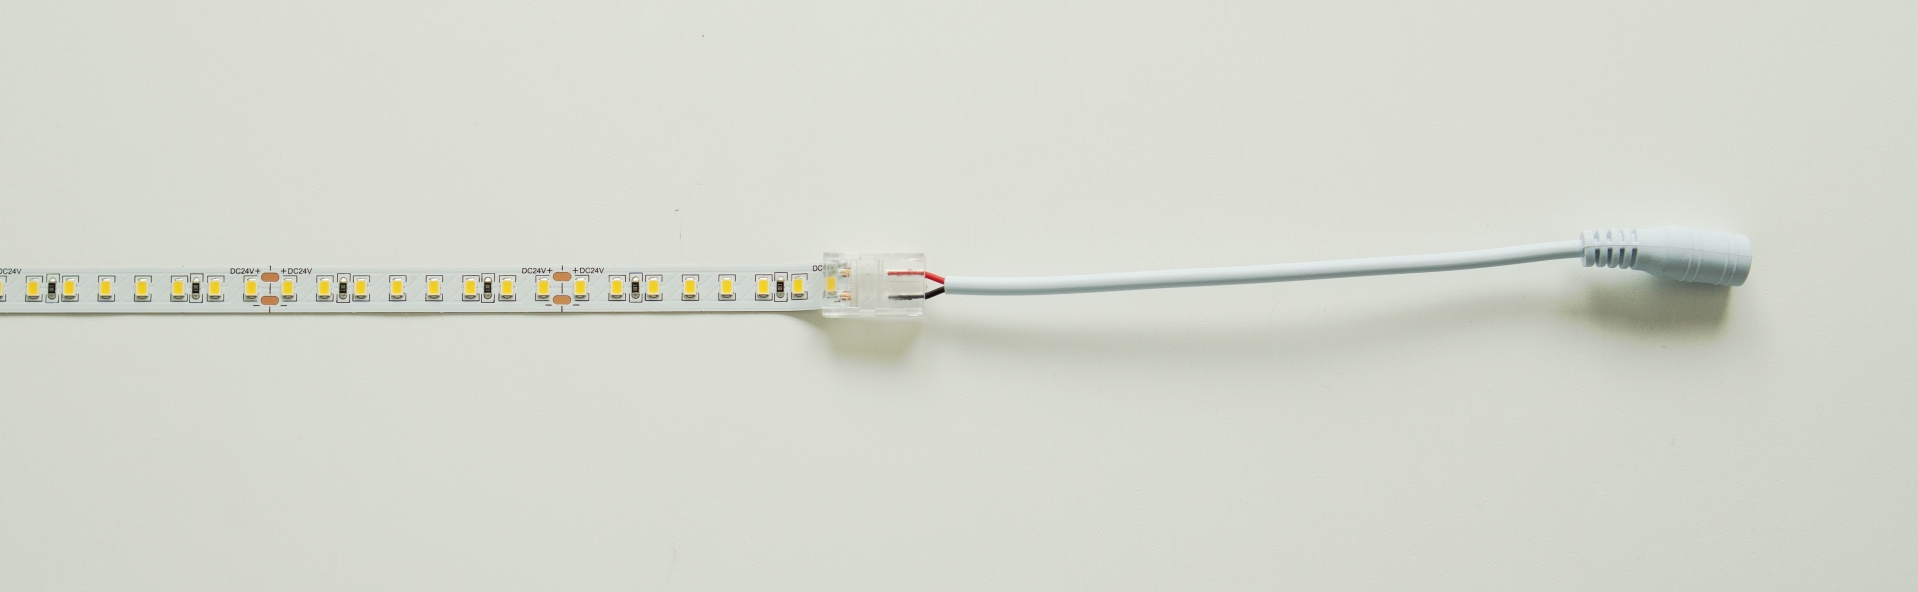 Connection diagram of LED strips using a double-sided connector with a socket